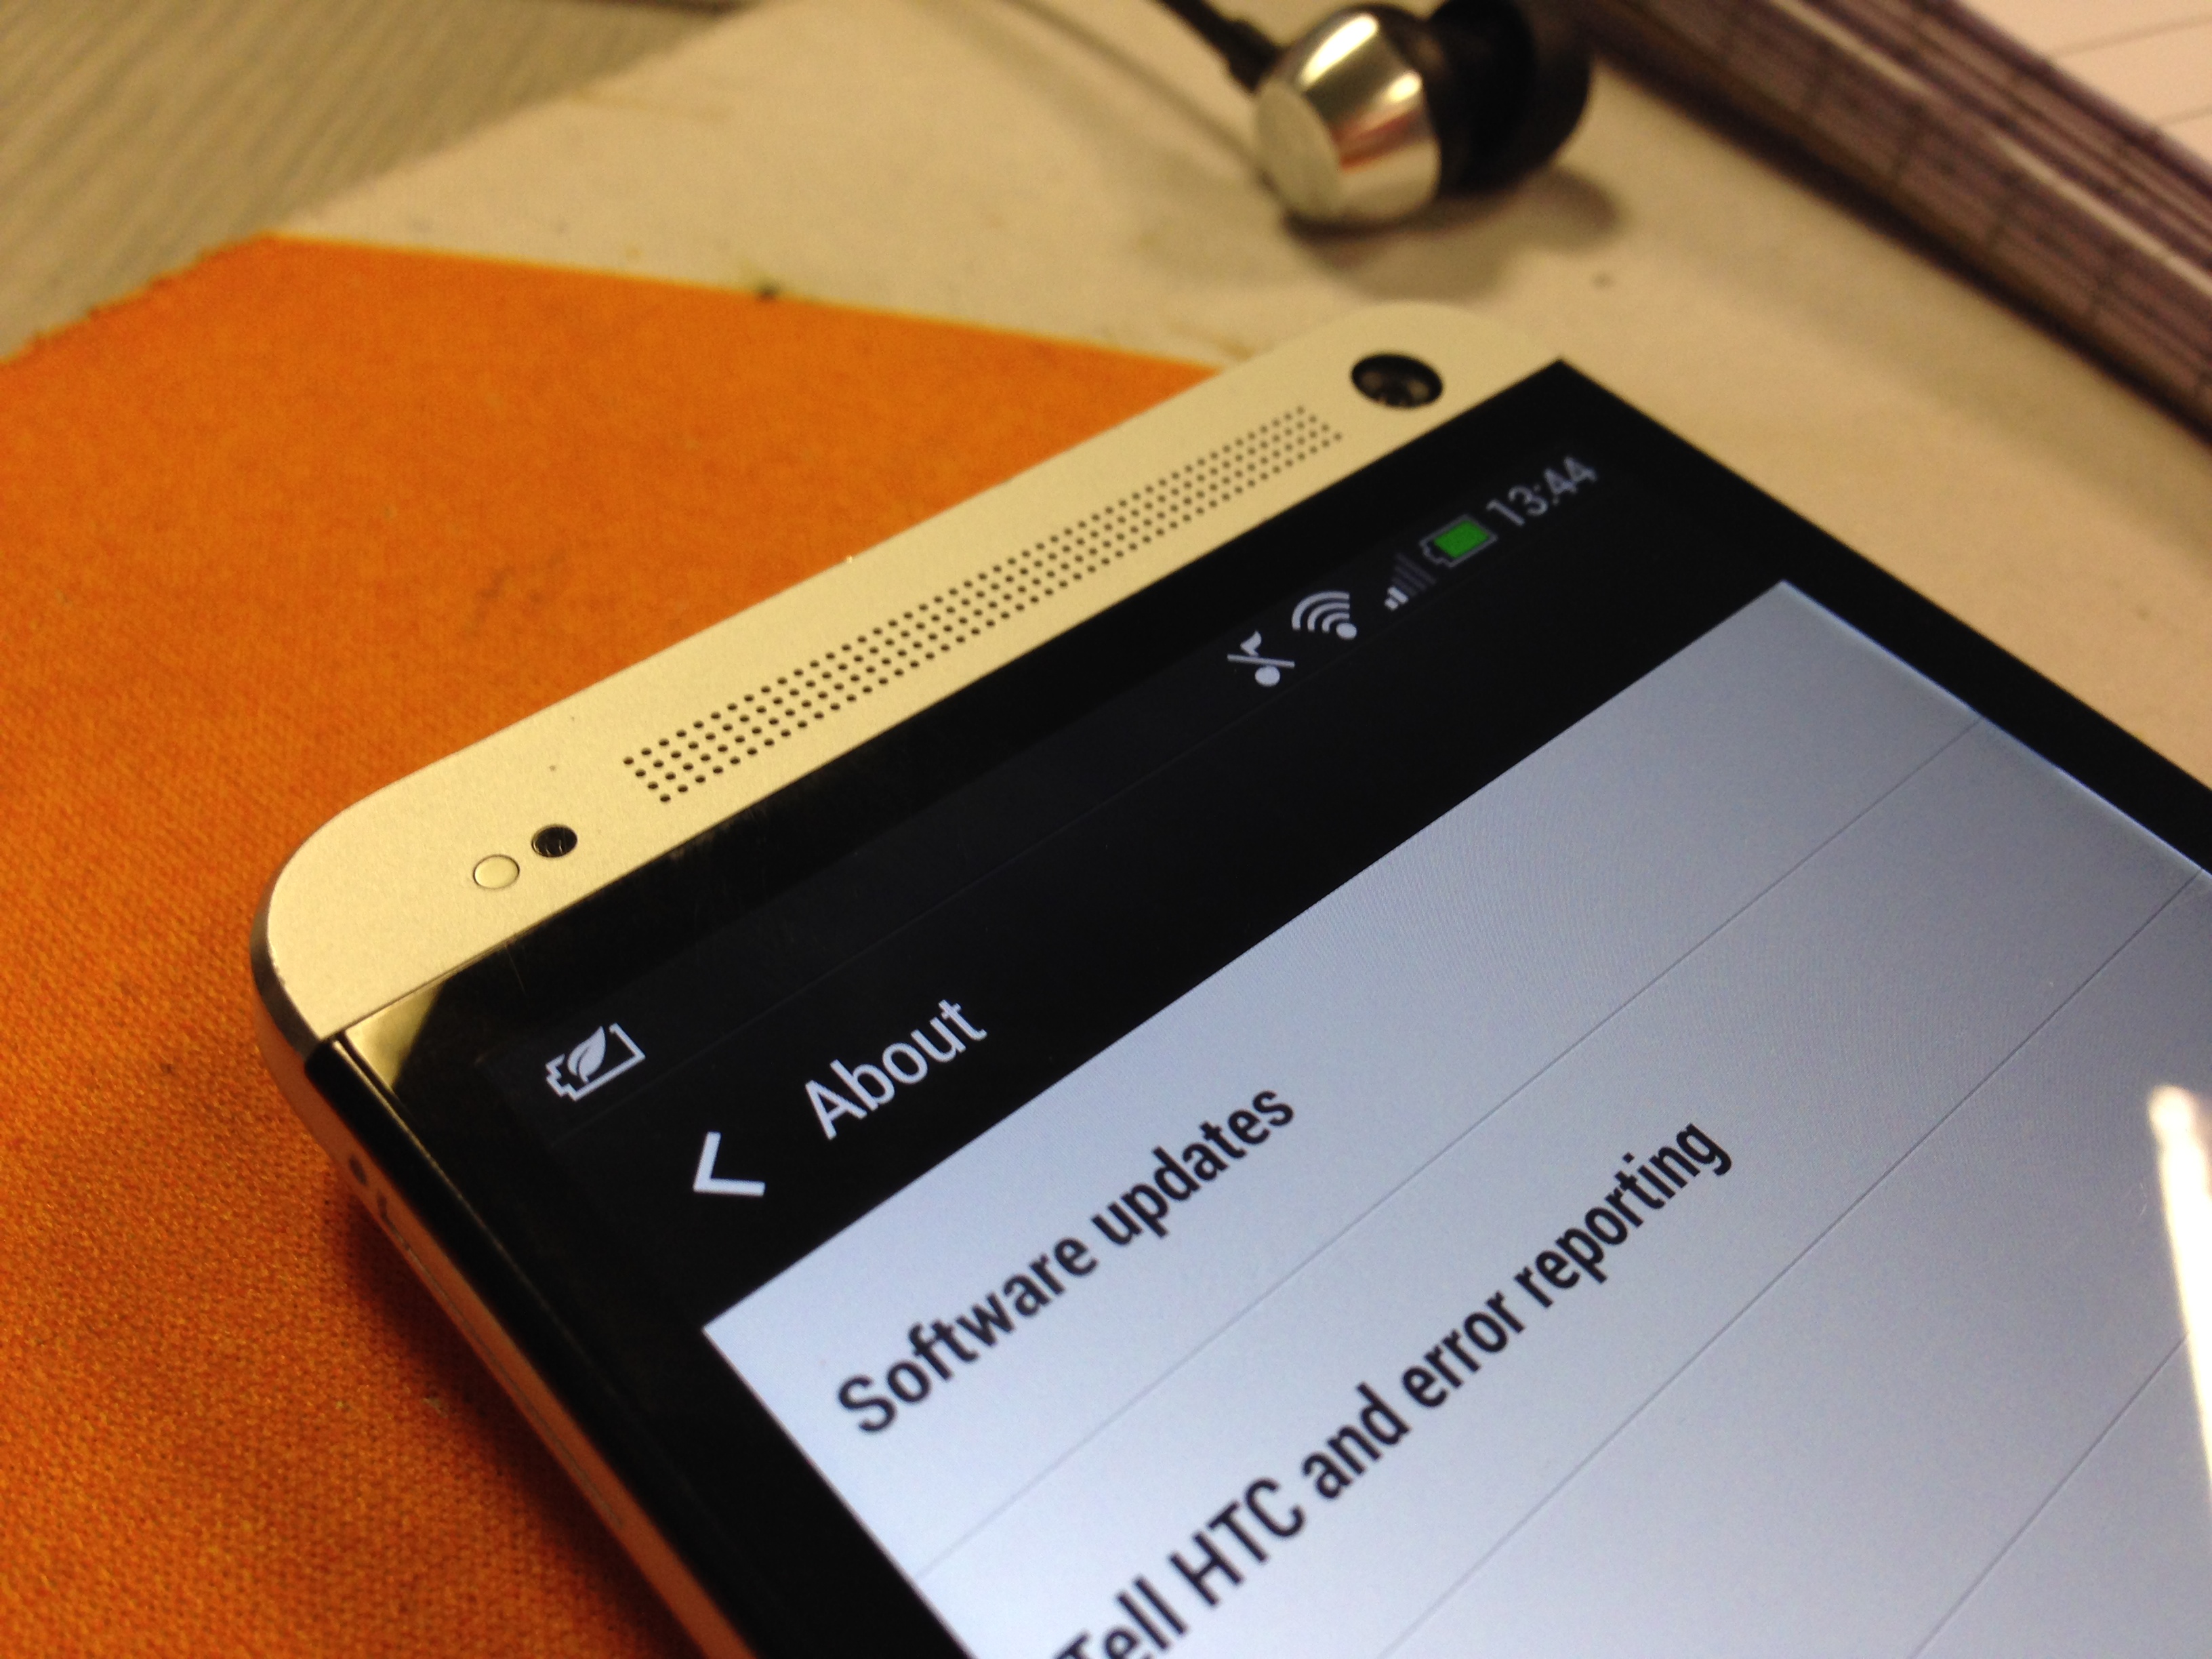 Android 4.3 and Sense 5.5 update hitting the HTC One from today